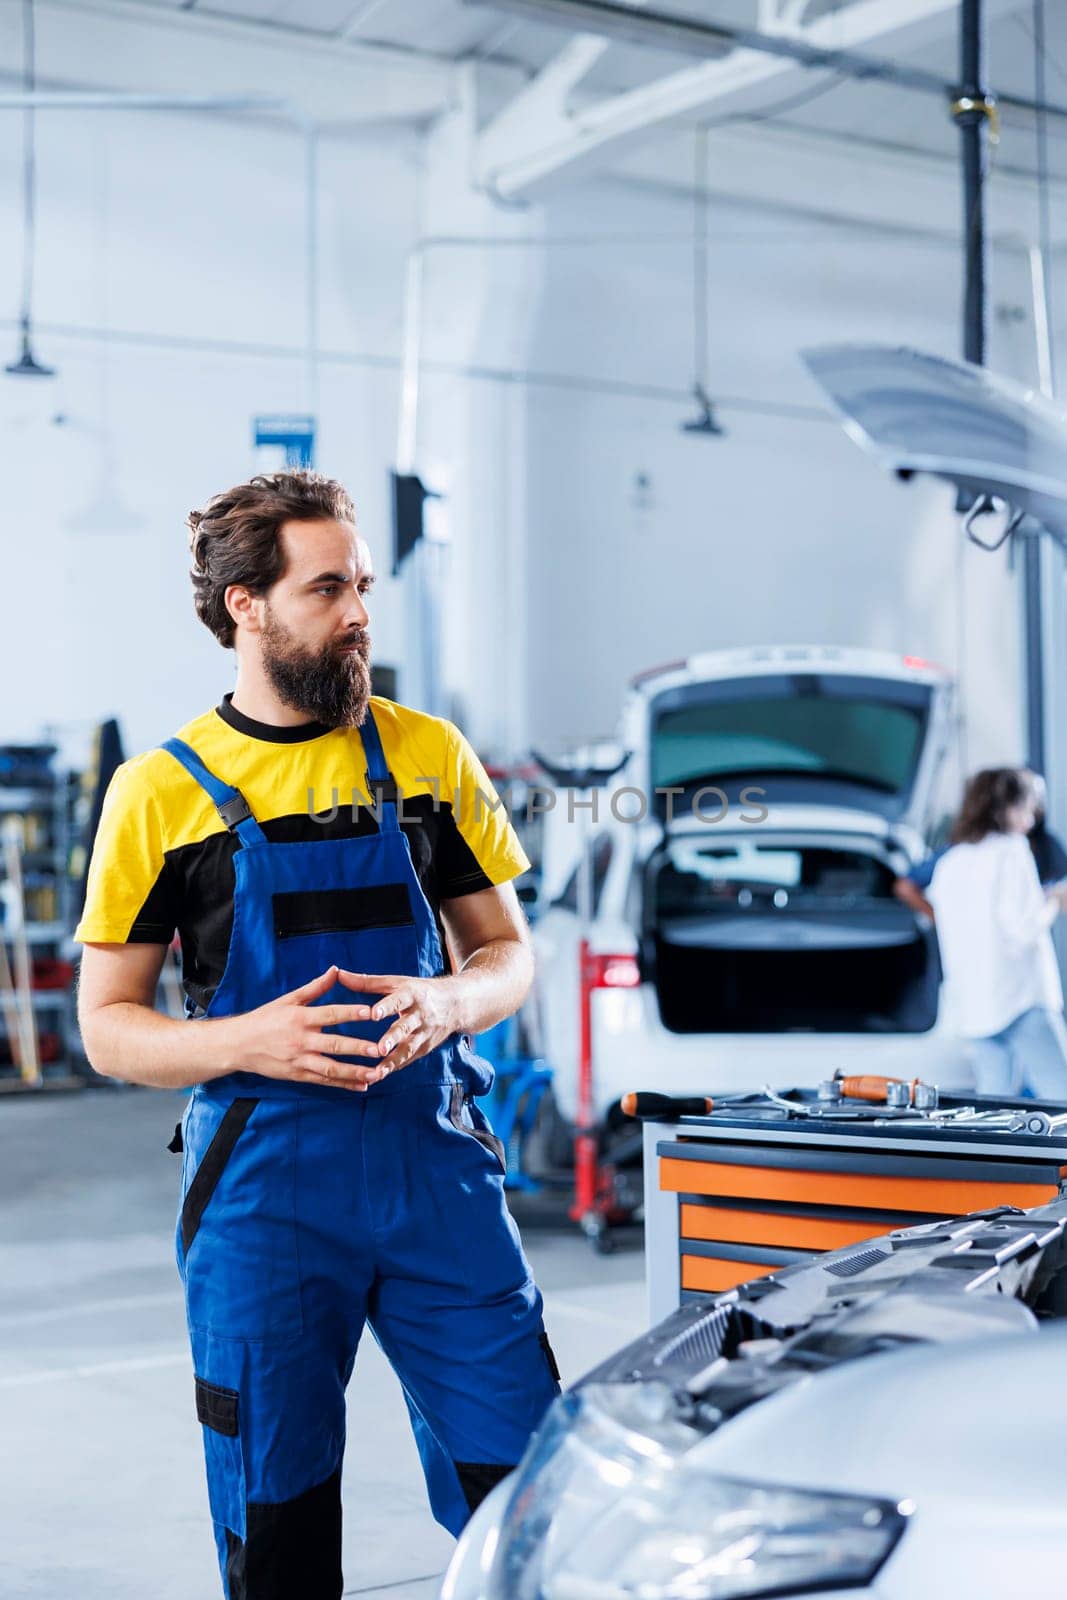 Engineer in repair shop using augmented reality holograms to check car specifications during checkup. Meticulous garage employee using futuristic AR technology to examine defective vehicle